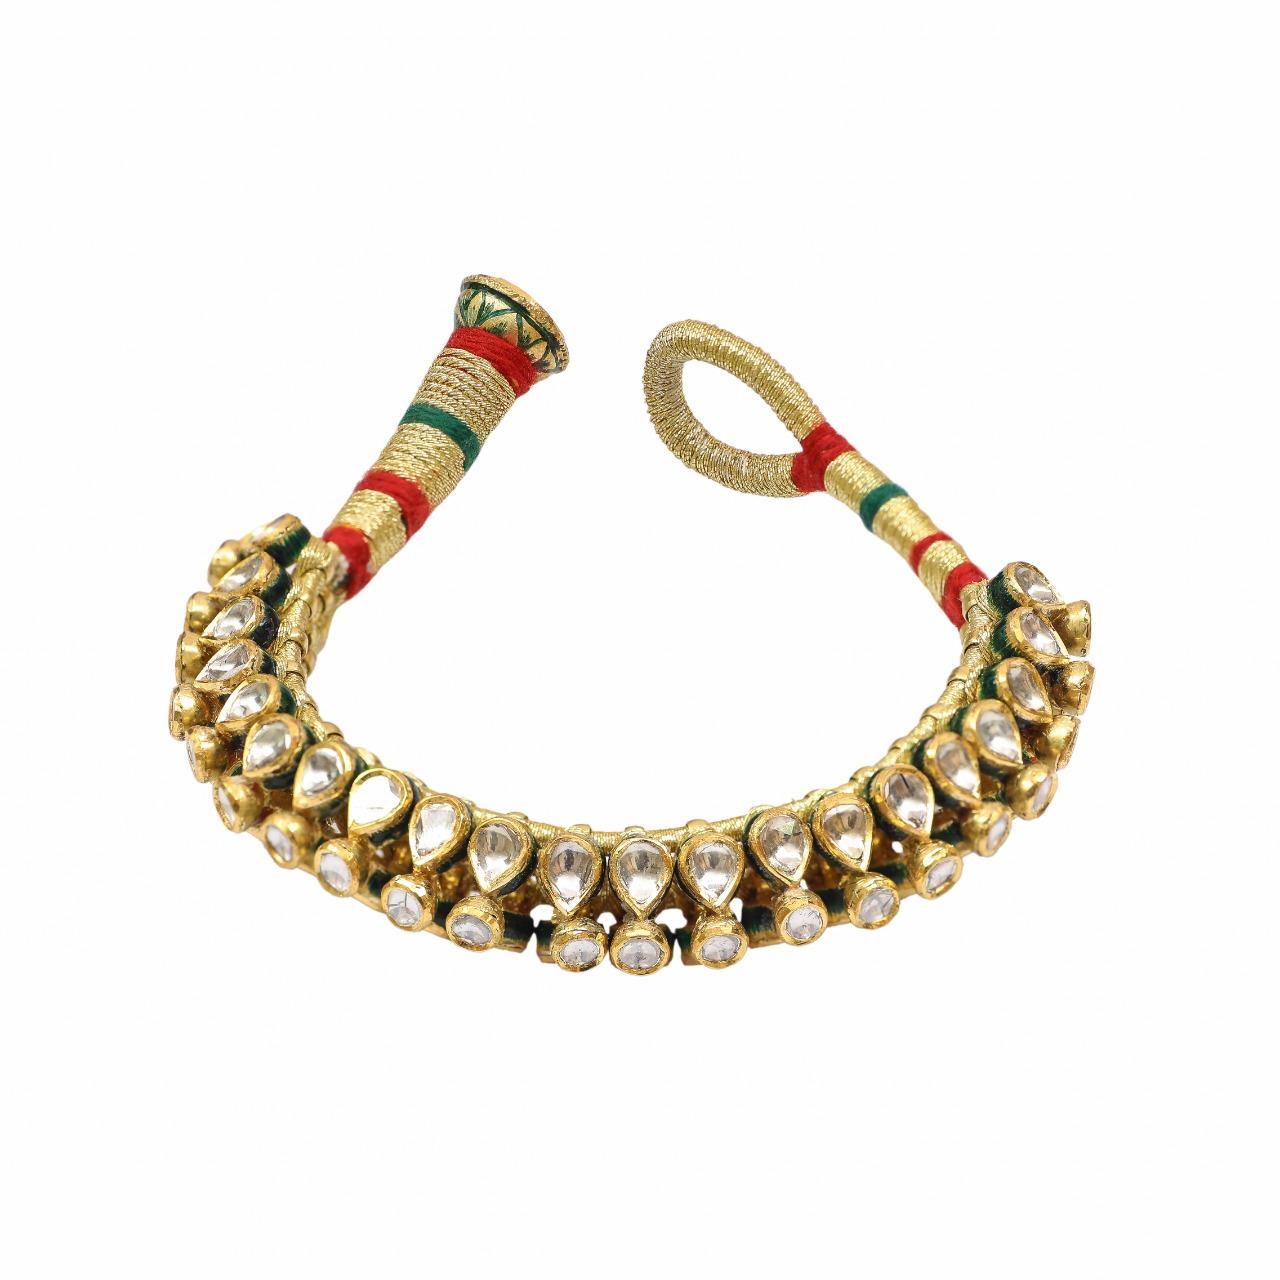 Art Deco Diamond and Gold Bracelet with Enamel Handcrafted in 18 Karat Gold